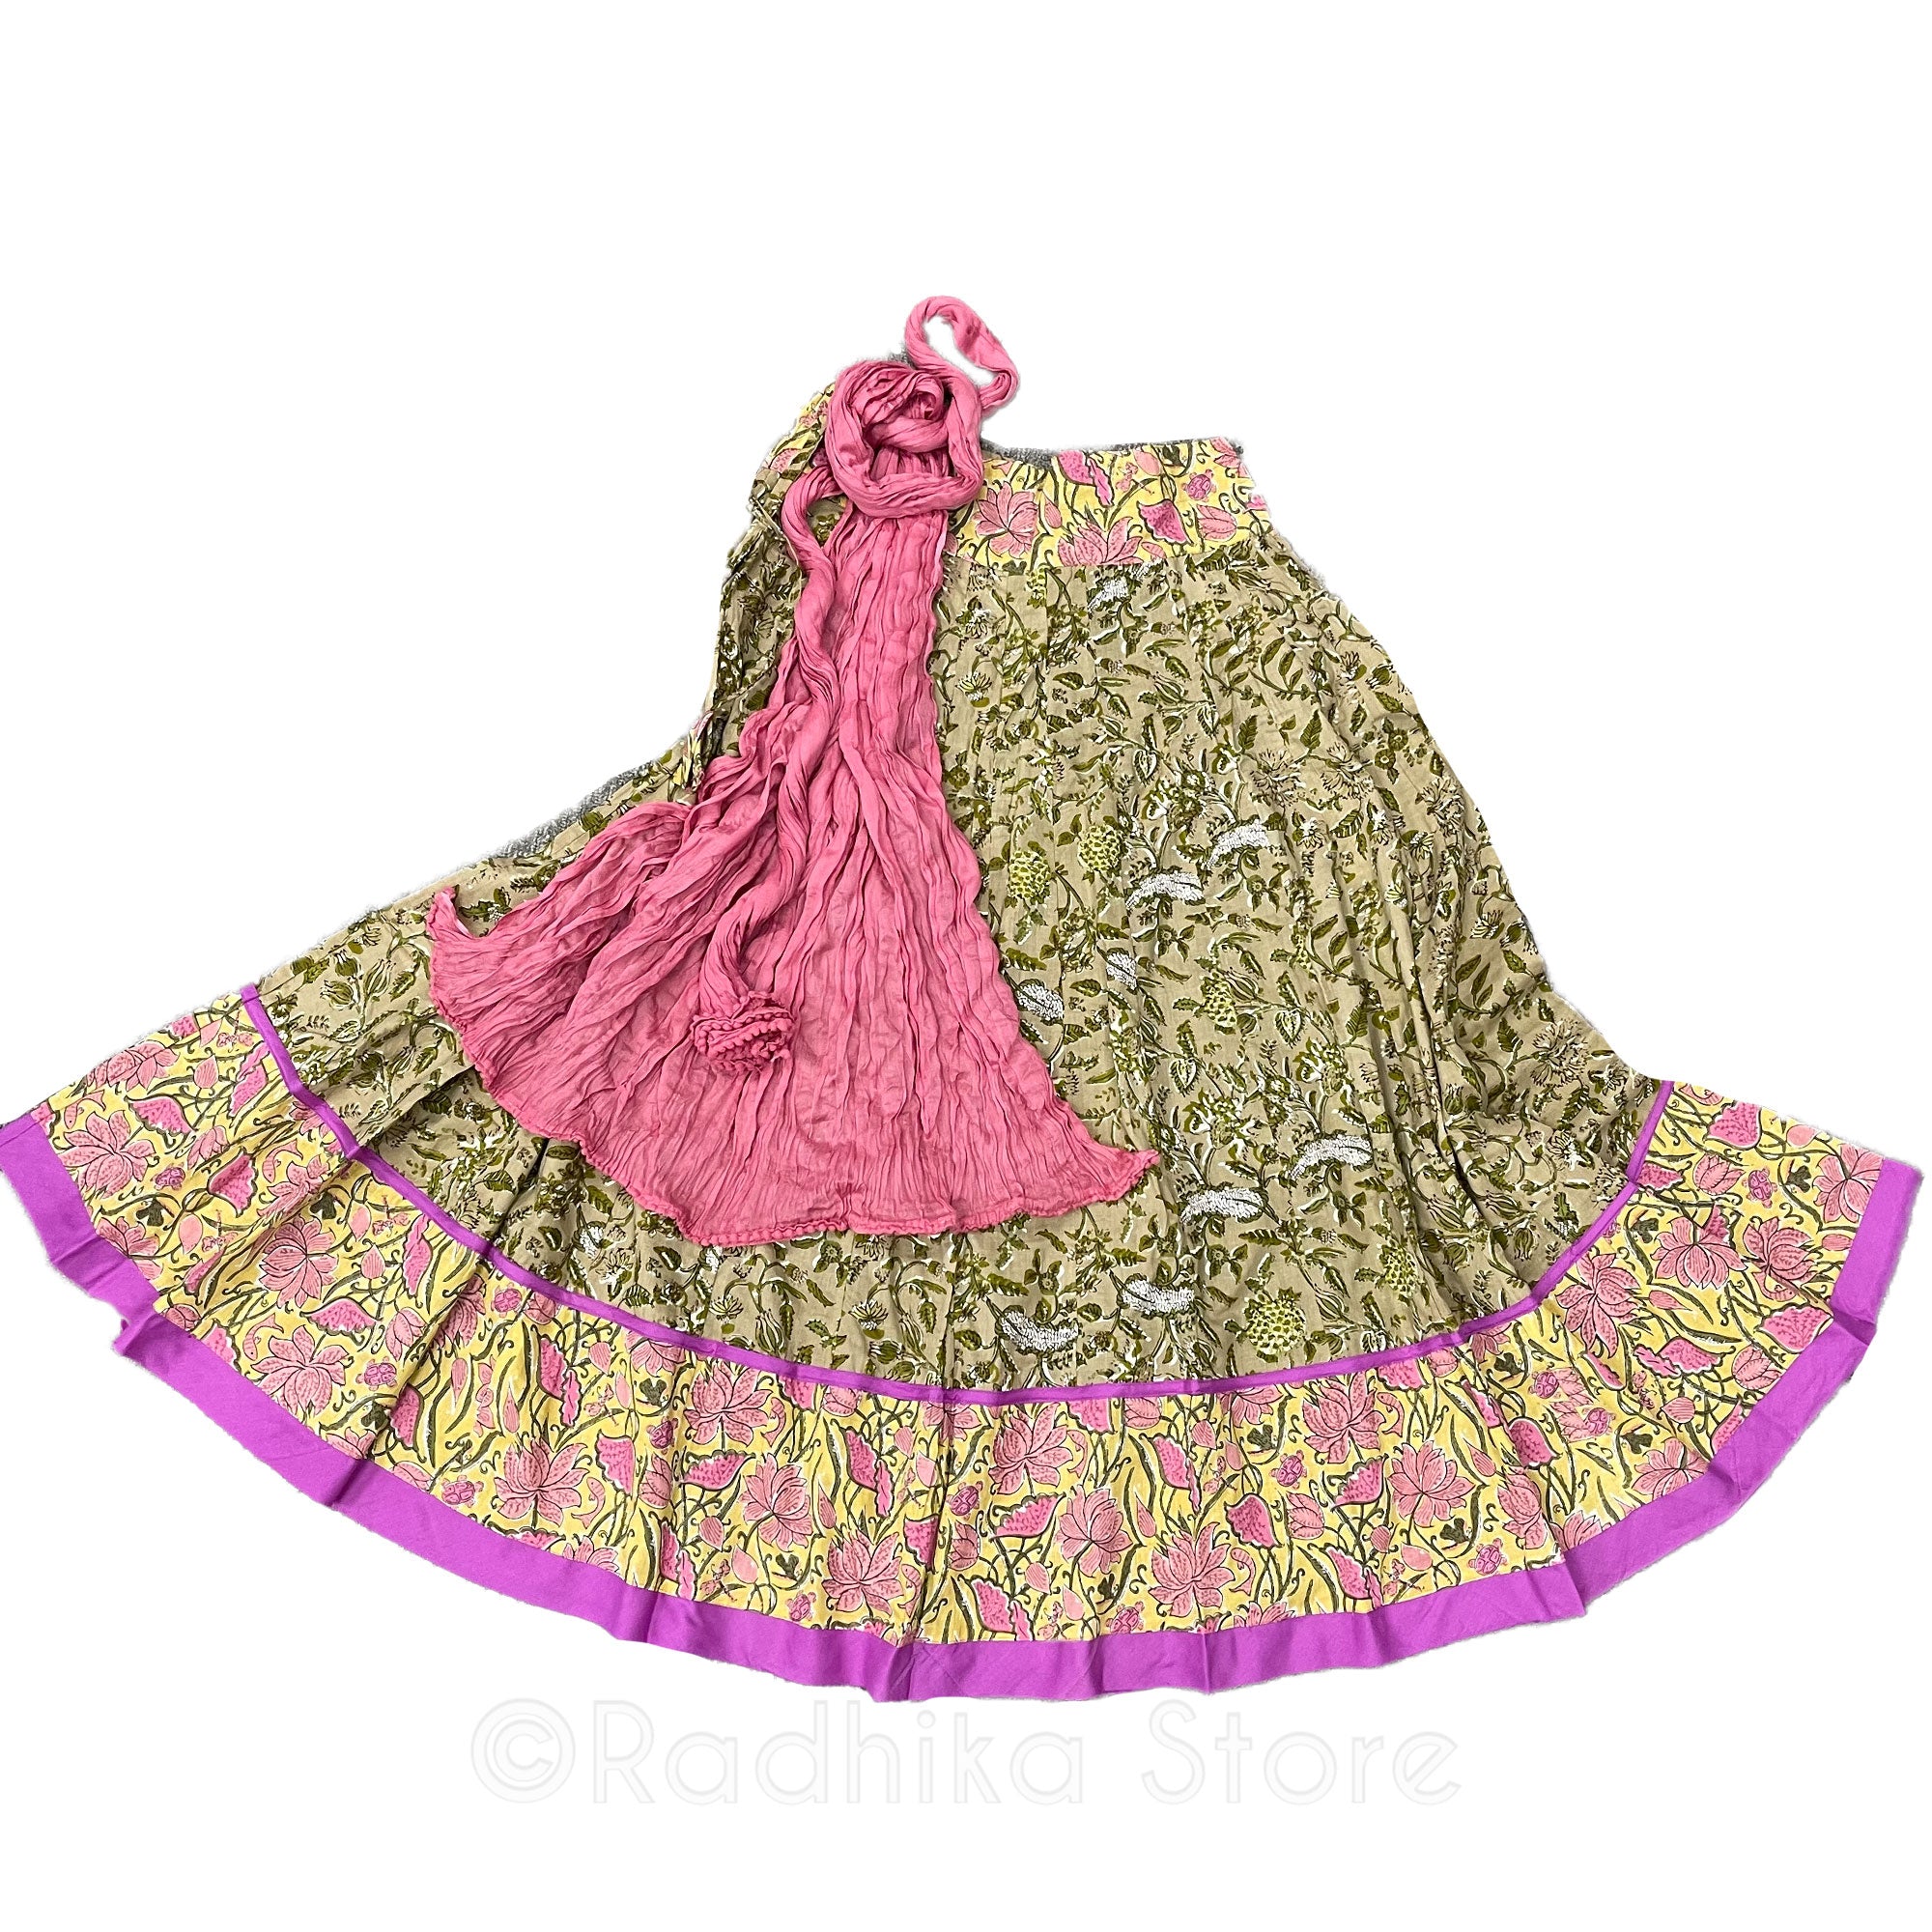 Raman Reti Garden - Gopi Skirt - Pinks and Greens With Yellow - Cotton Screen Print Fabric - With Chadar - Large